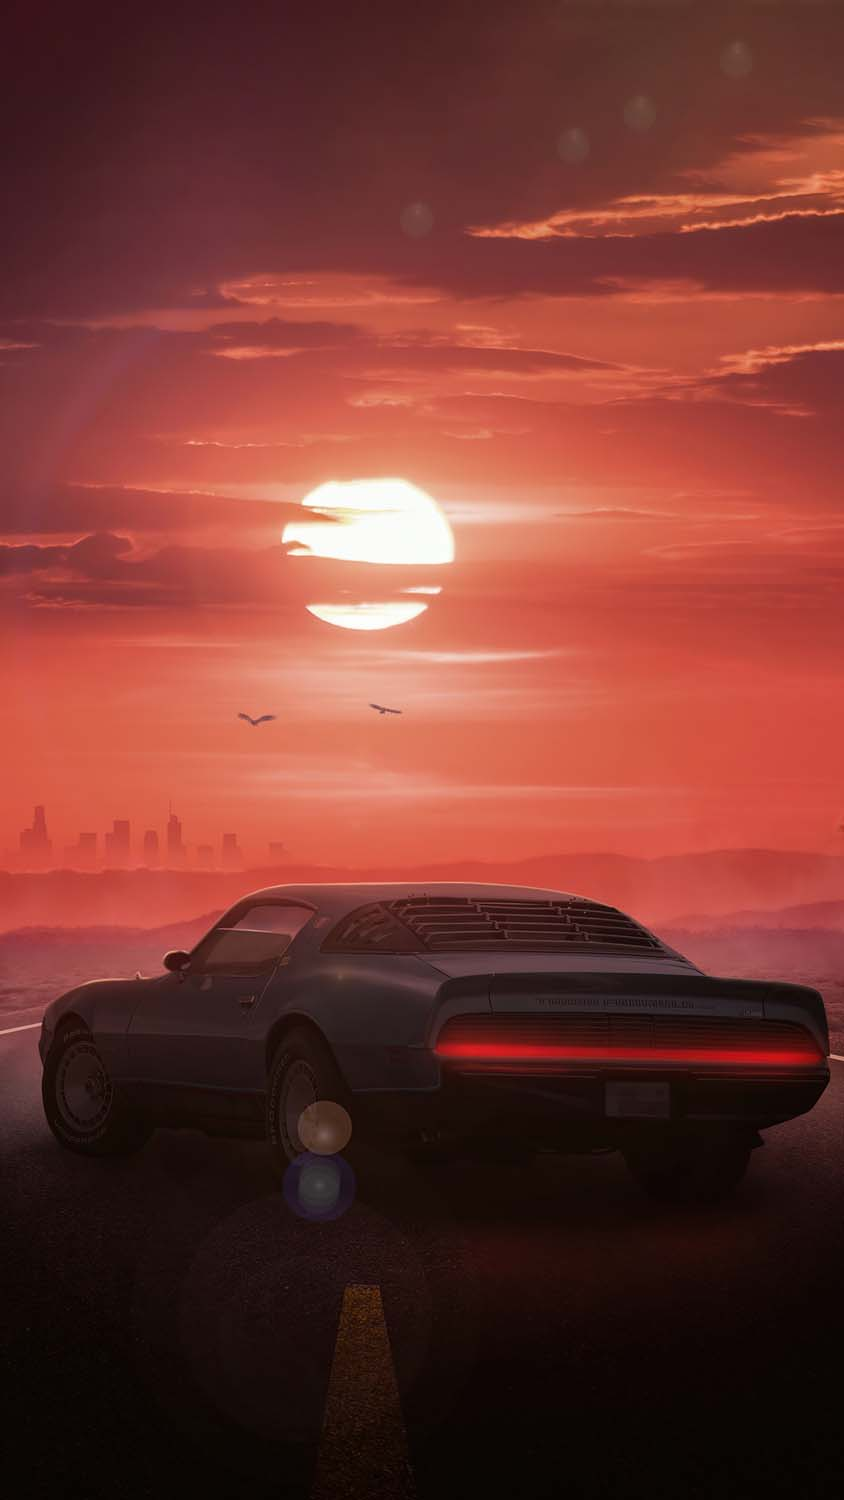 Mad Max Road IPhone Wallpaper HD  IPhone Wallpapers